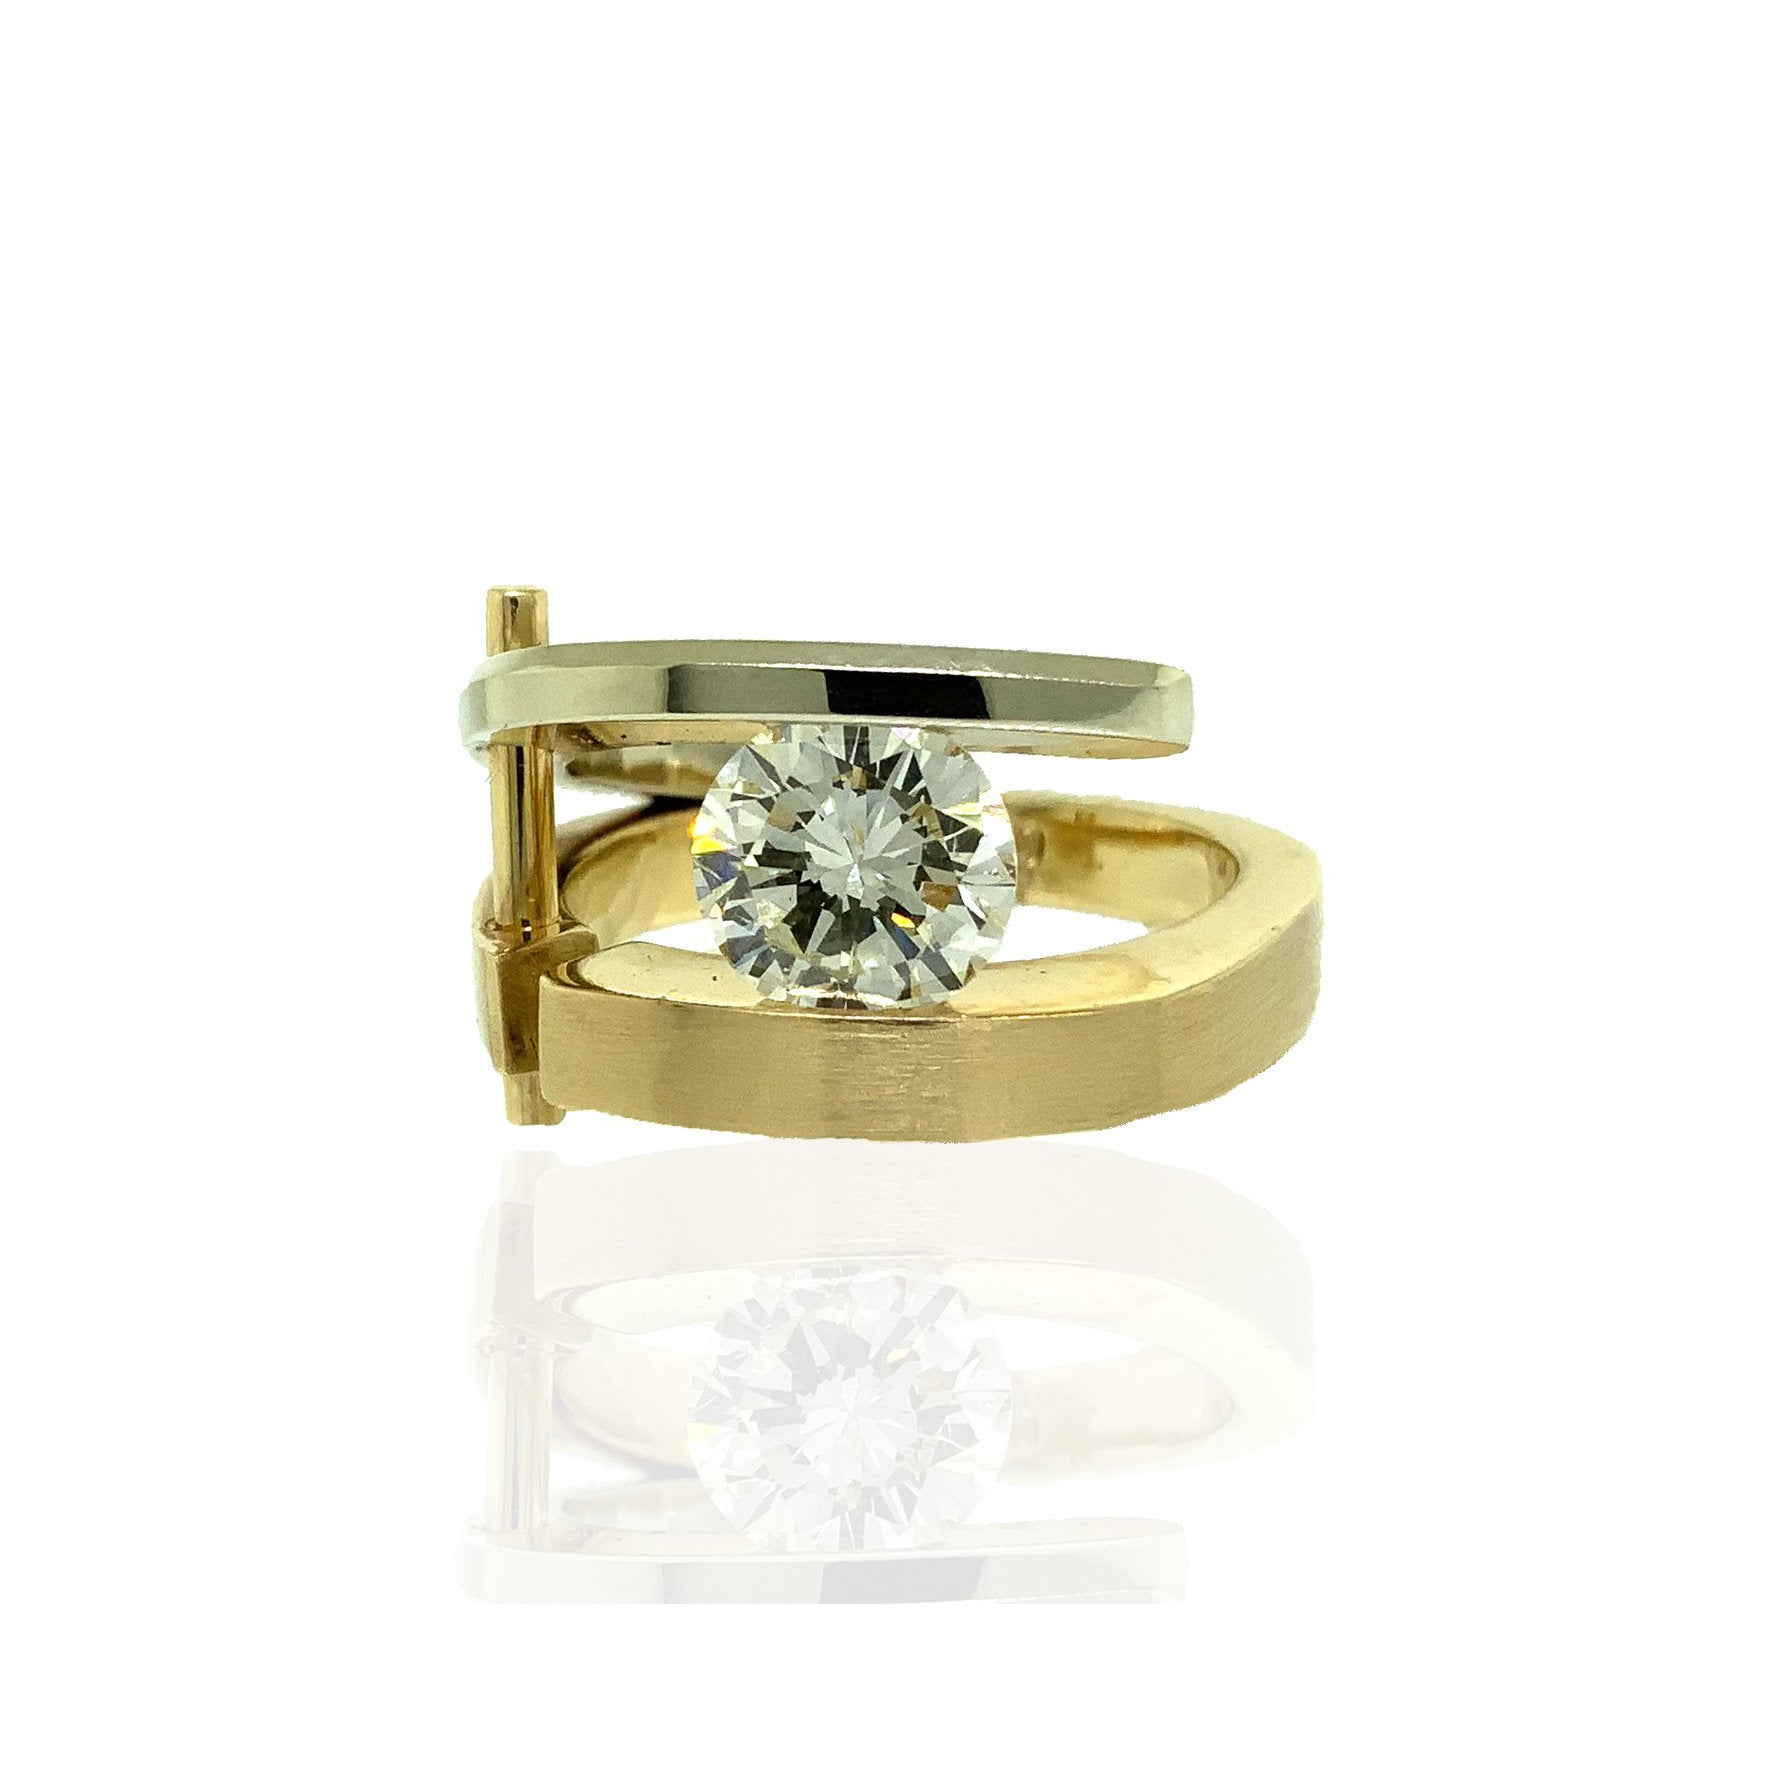 14K White and Yellow Gold Diamond Architecture Style Ring